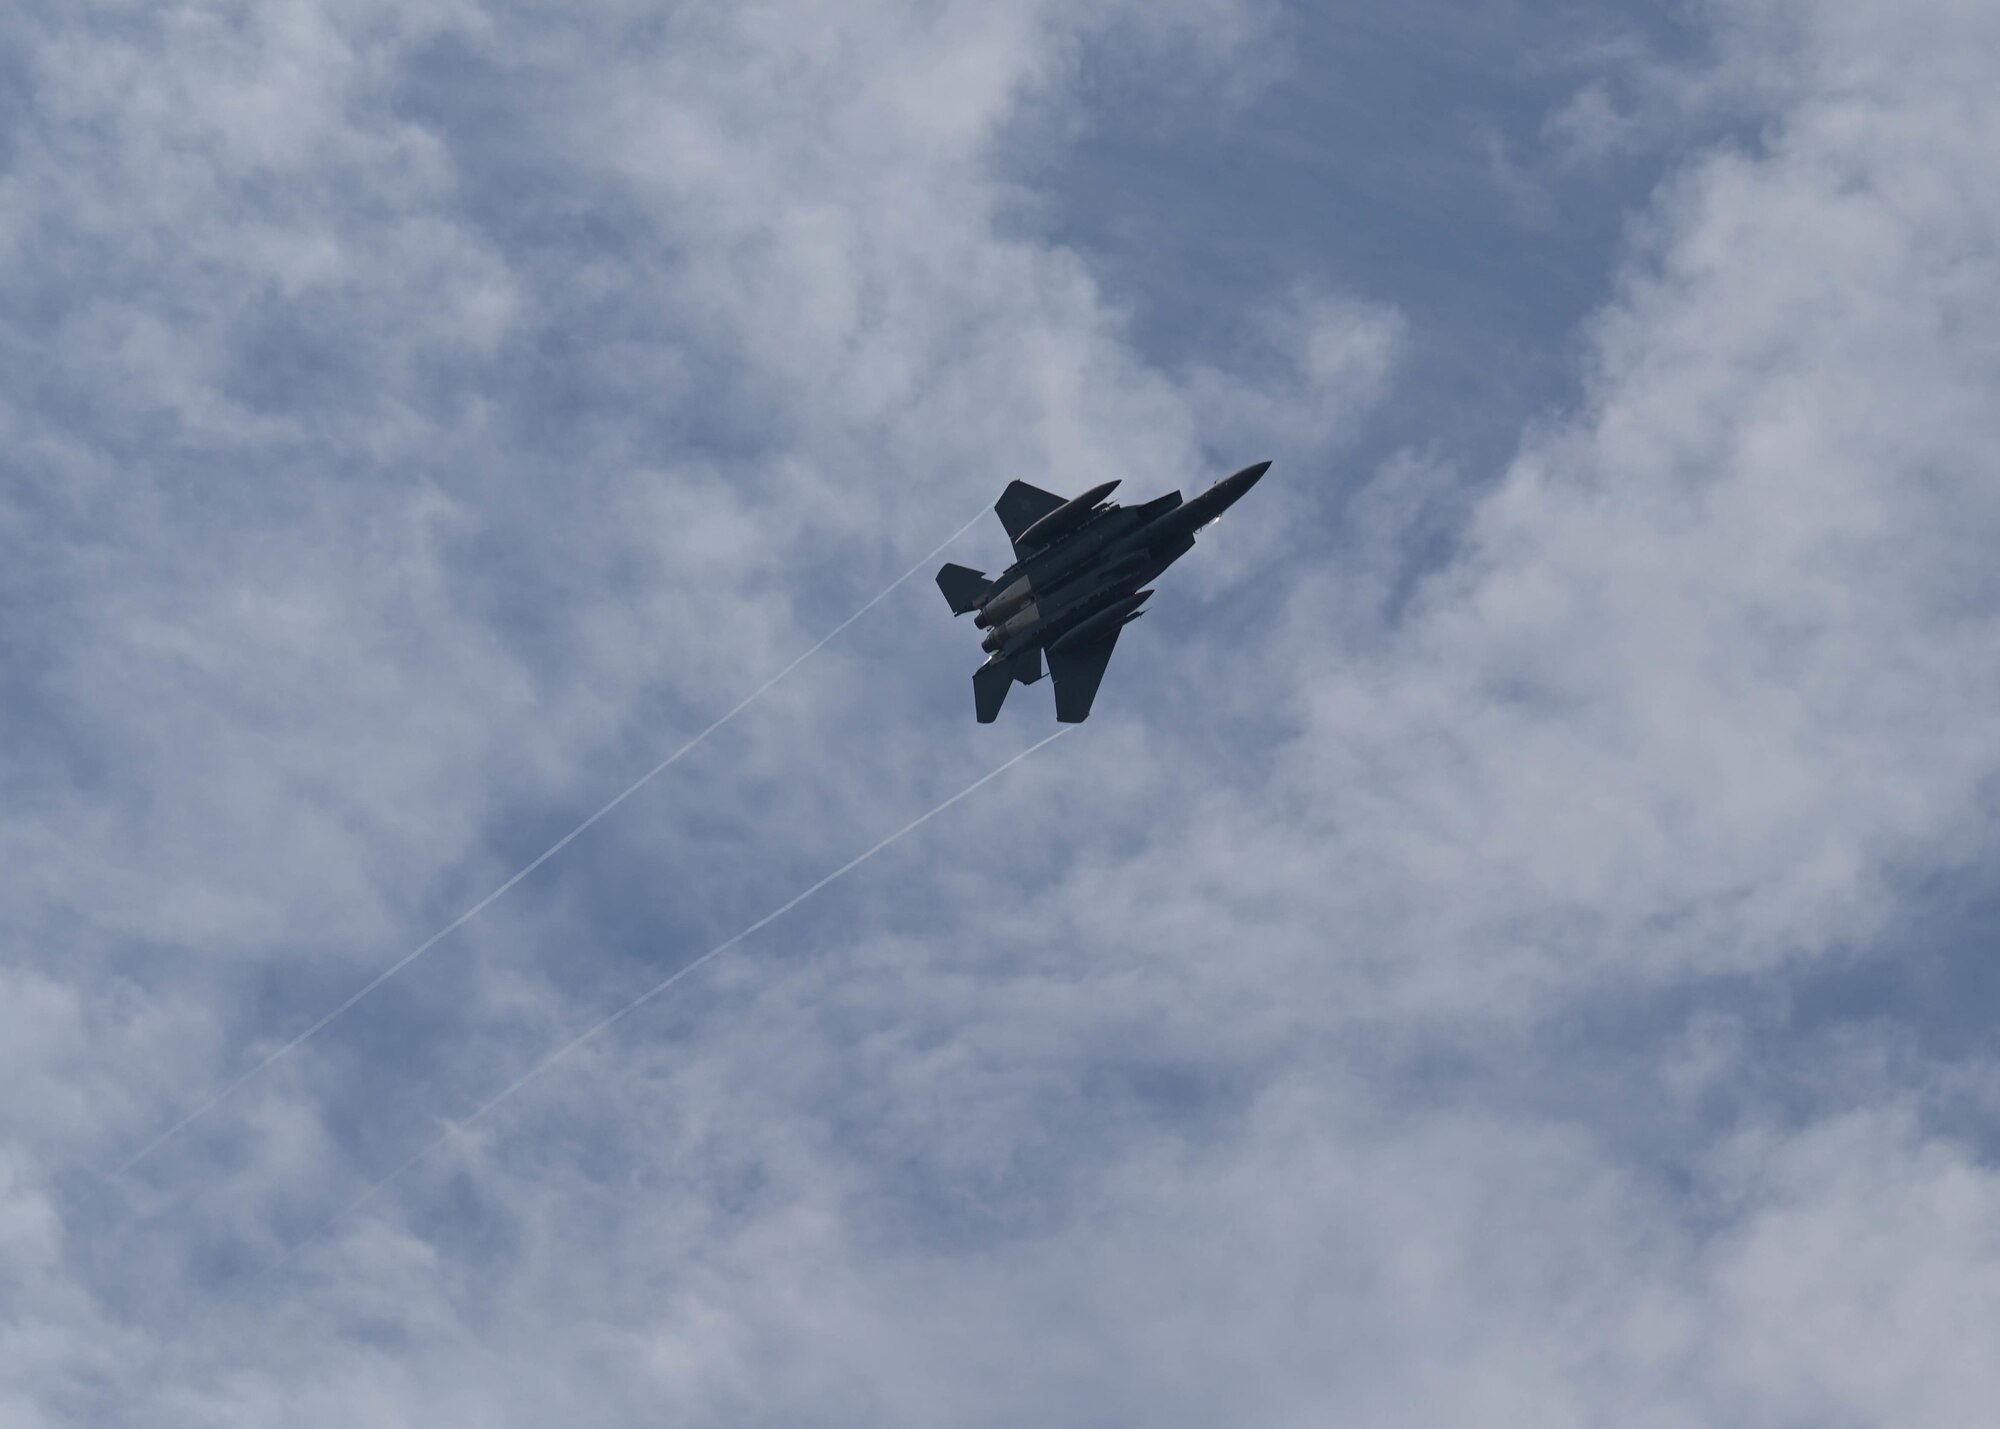 A Republic of Korea F-15K Slam Eagle assigned to the 110th Fighter Squadron flies above Kunsan Air Base, Republic of Korea, Sept. 22, 2022. The visiting 110th FS participated in a joint training event with 8th Fighter Wing F-16 Fighting Falcons. (U.S. Air Force photo by Staff Sgt. Isaiah J. Soliz)